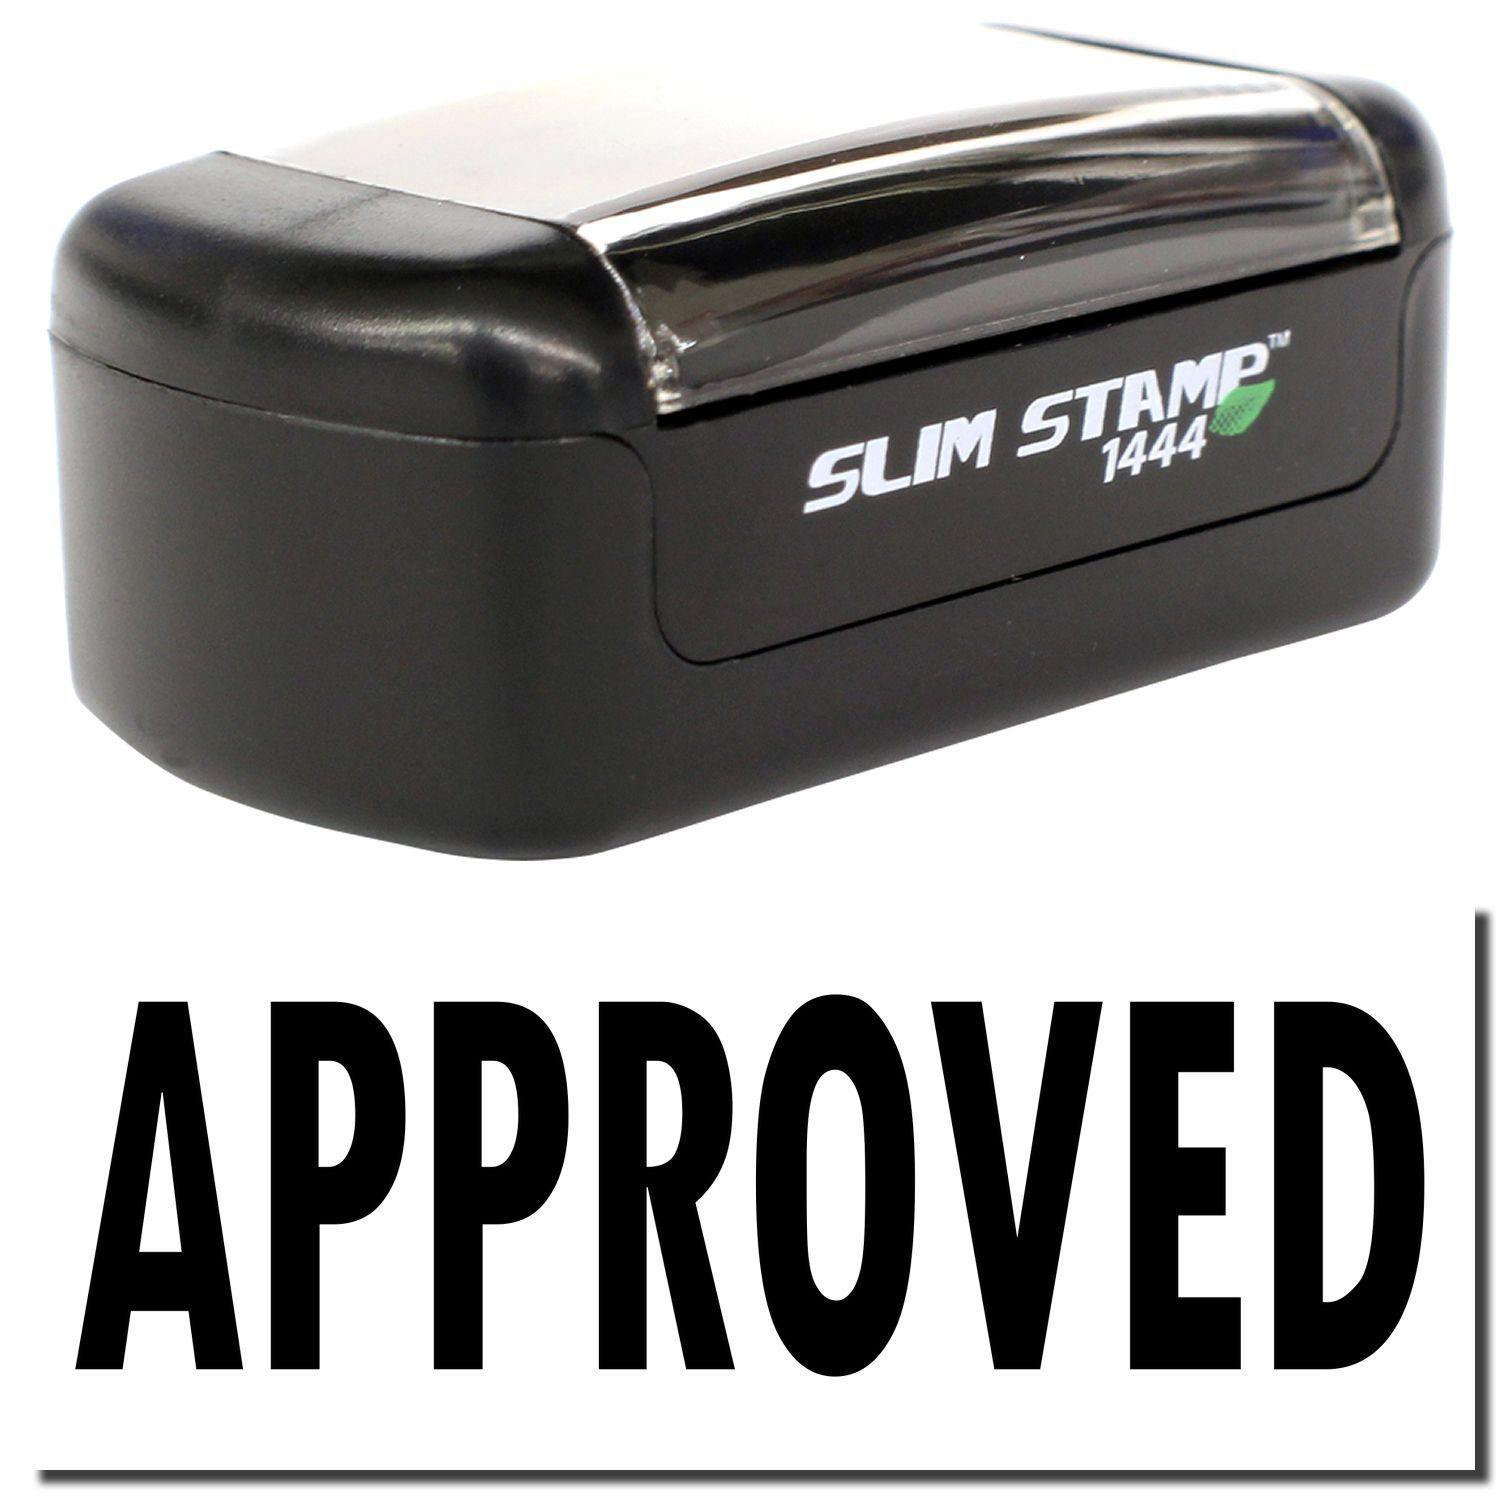 A stock office pre-inked stamp with a stamped image showing how the text "APPROVED" is displayed after stamping.